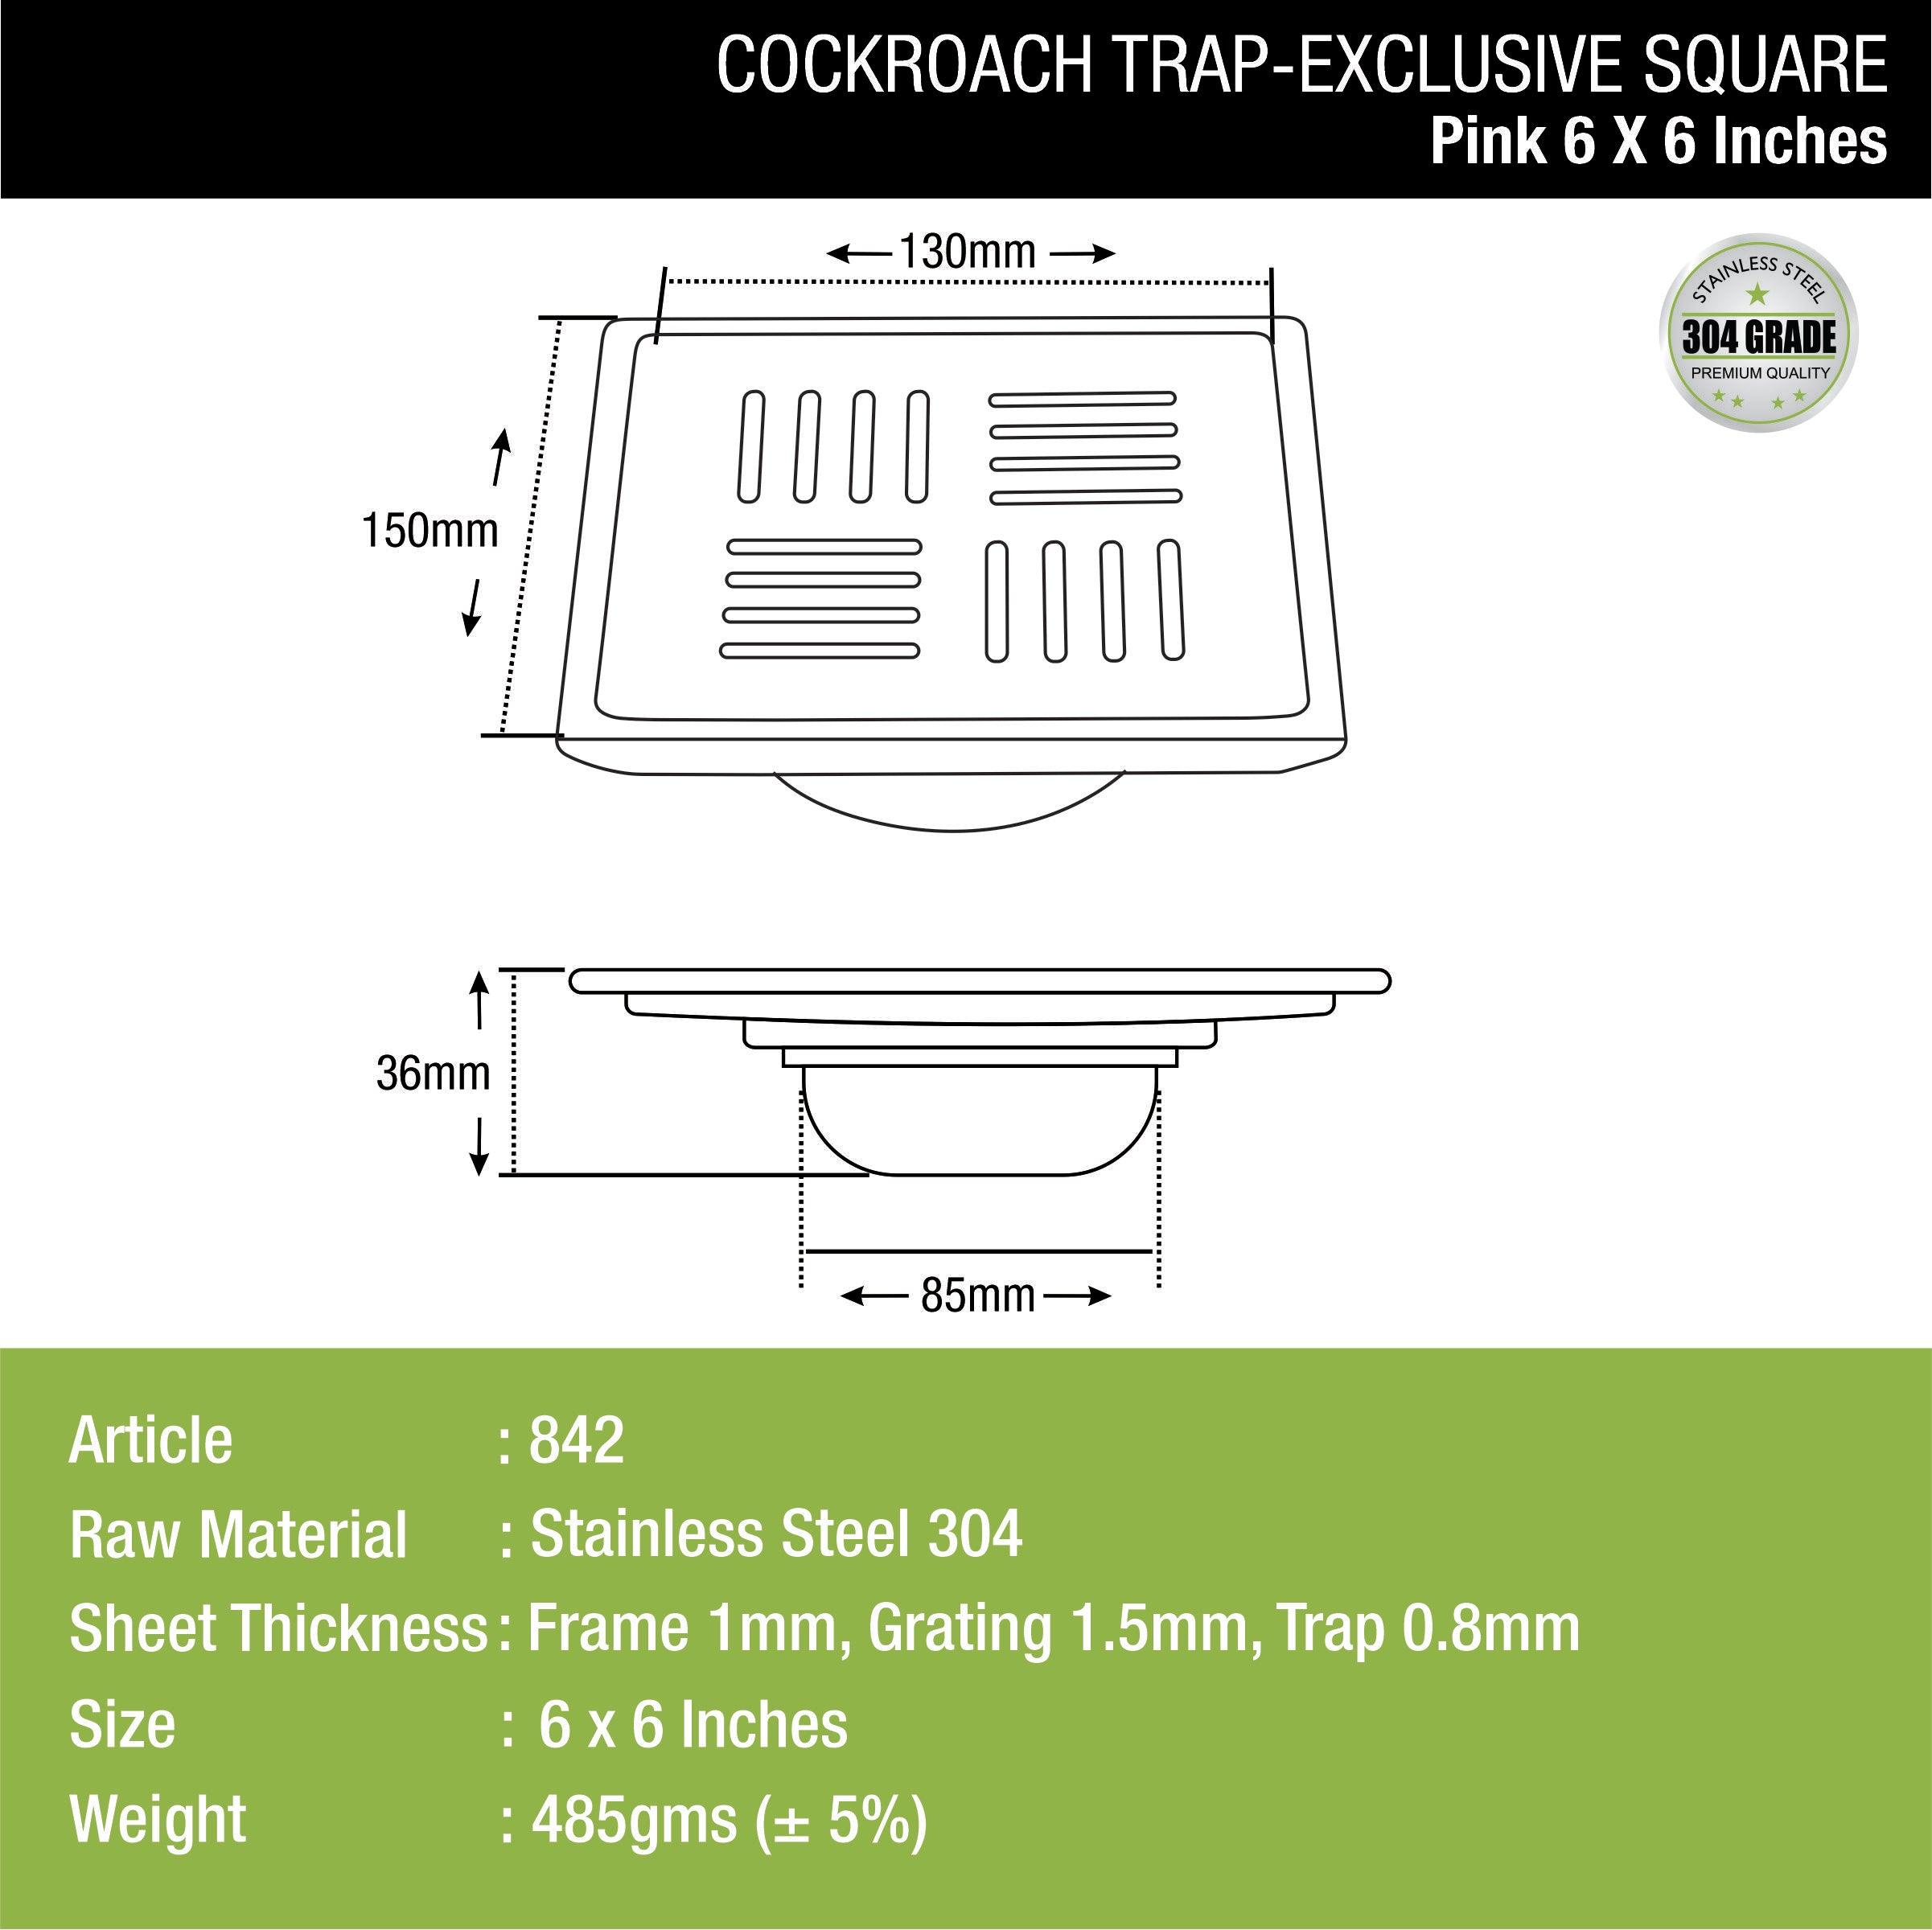 Pink Exclusive Square Floor Drain (6 x 6 Inches) with Cockroach Trap dimensions and sizes